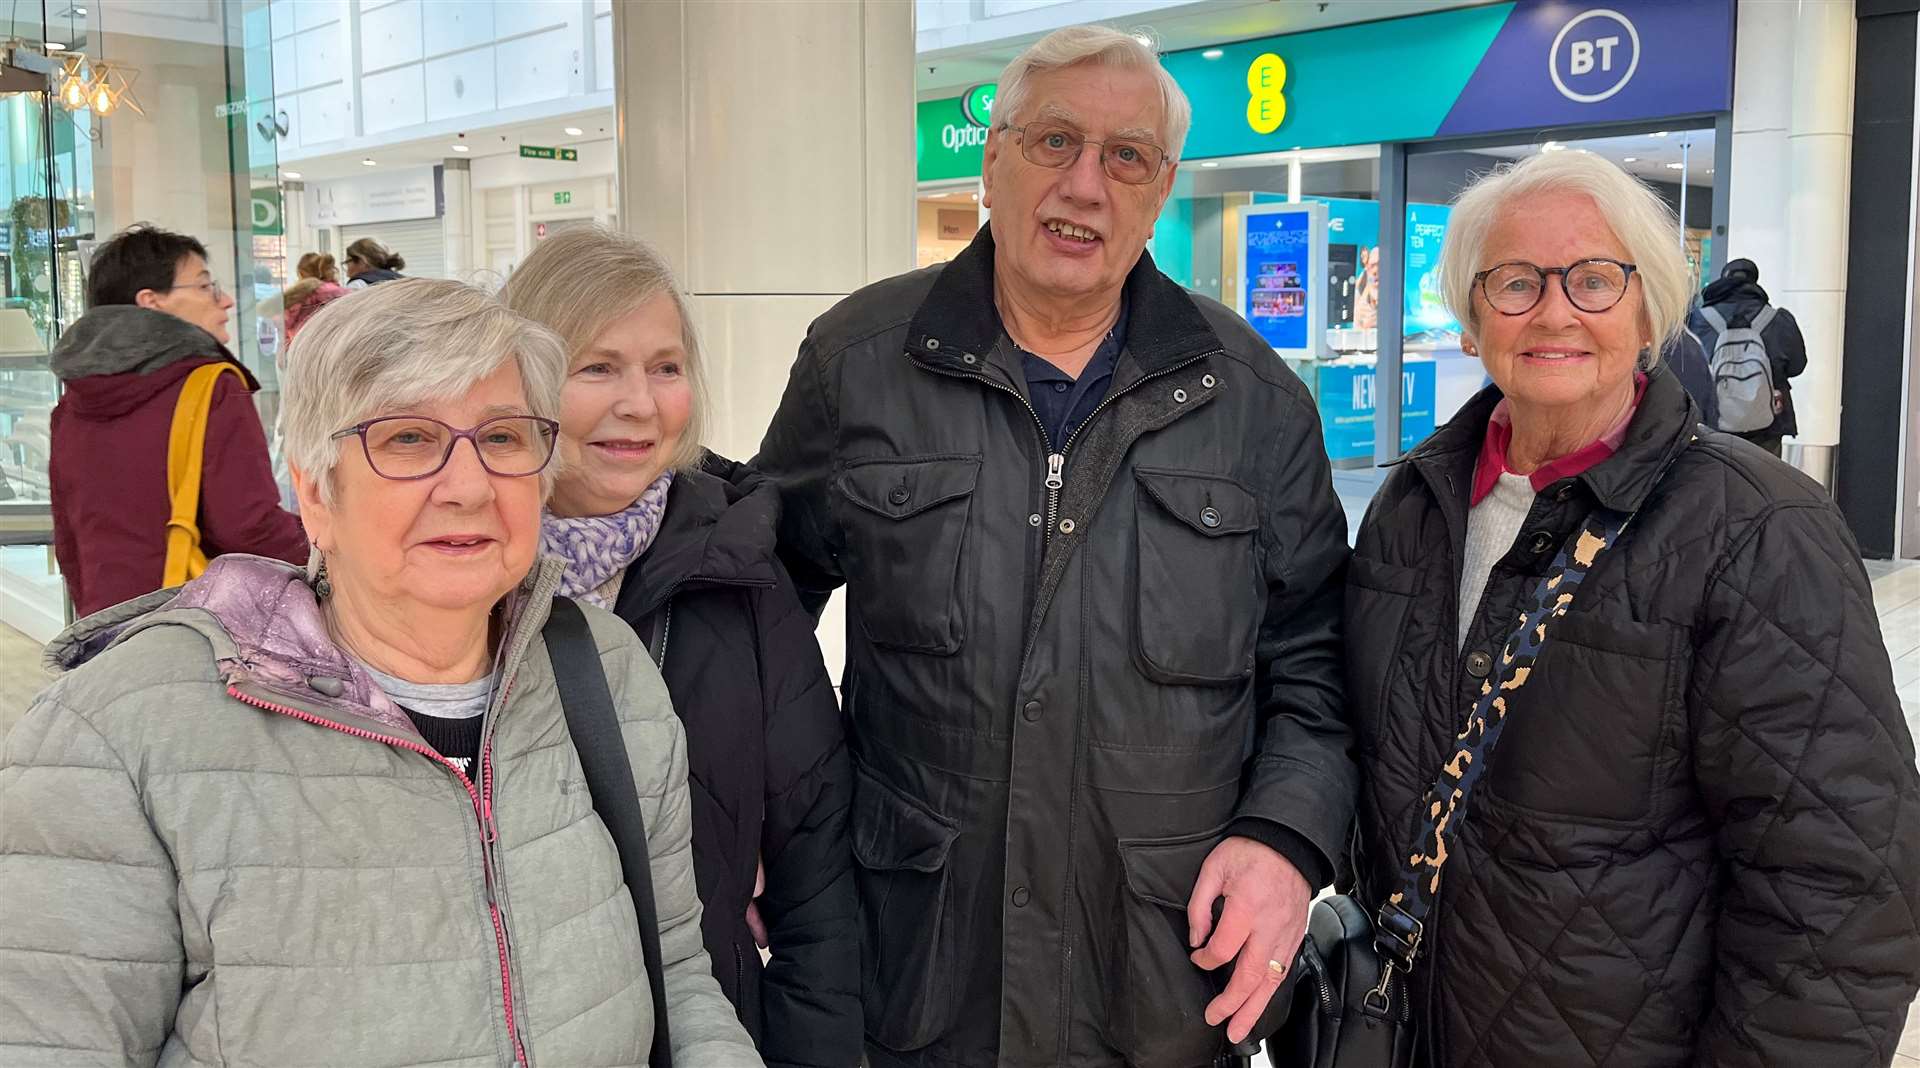 Heather Slater, Megan Featherstone, Charles Slater and Carol Moore are all calling for more shops to open in Ashford